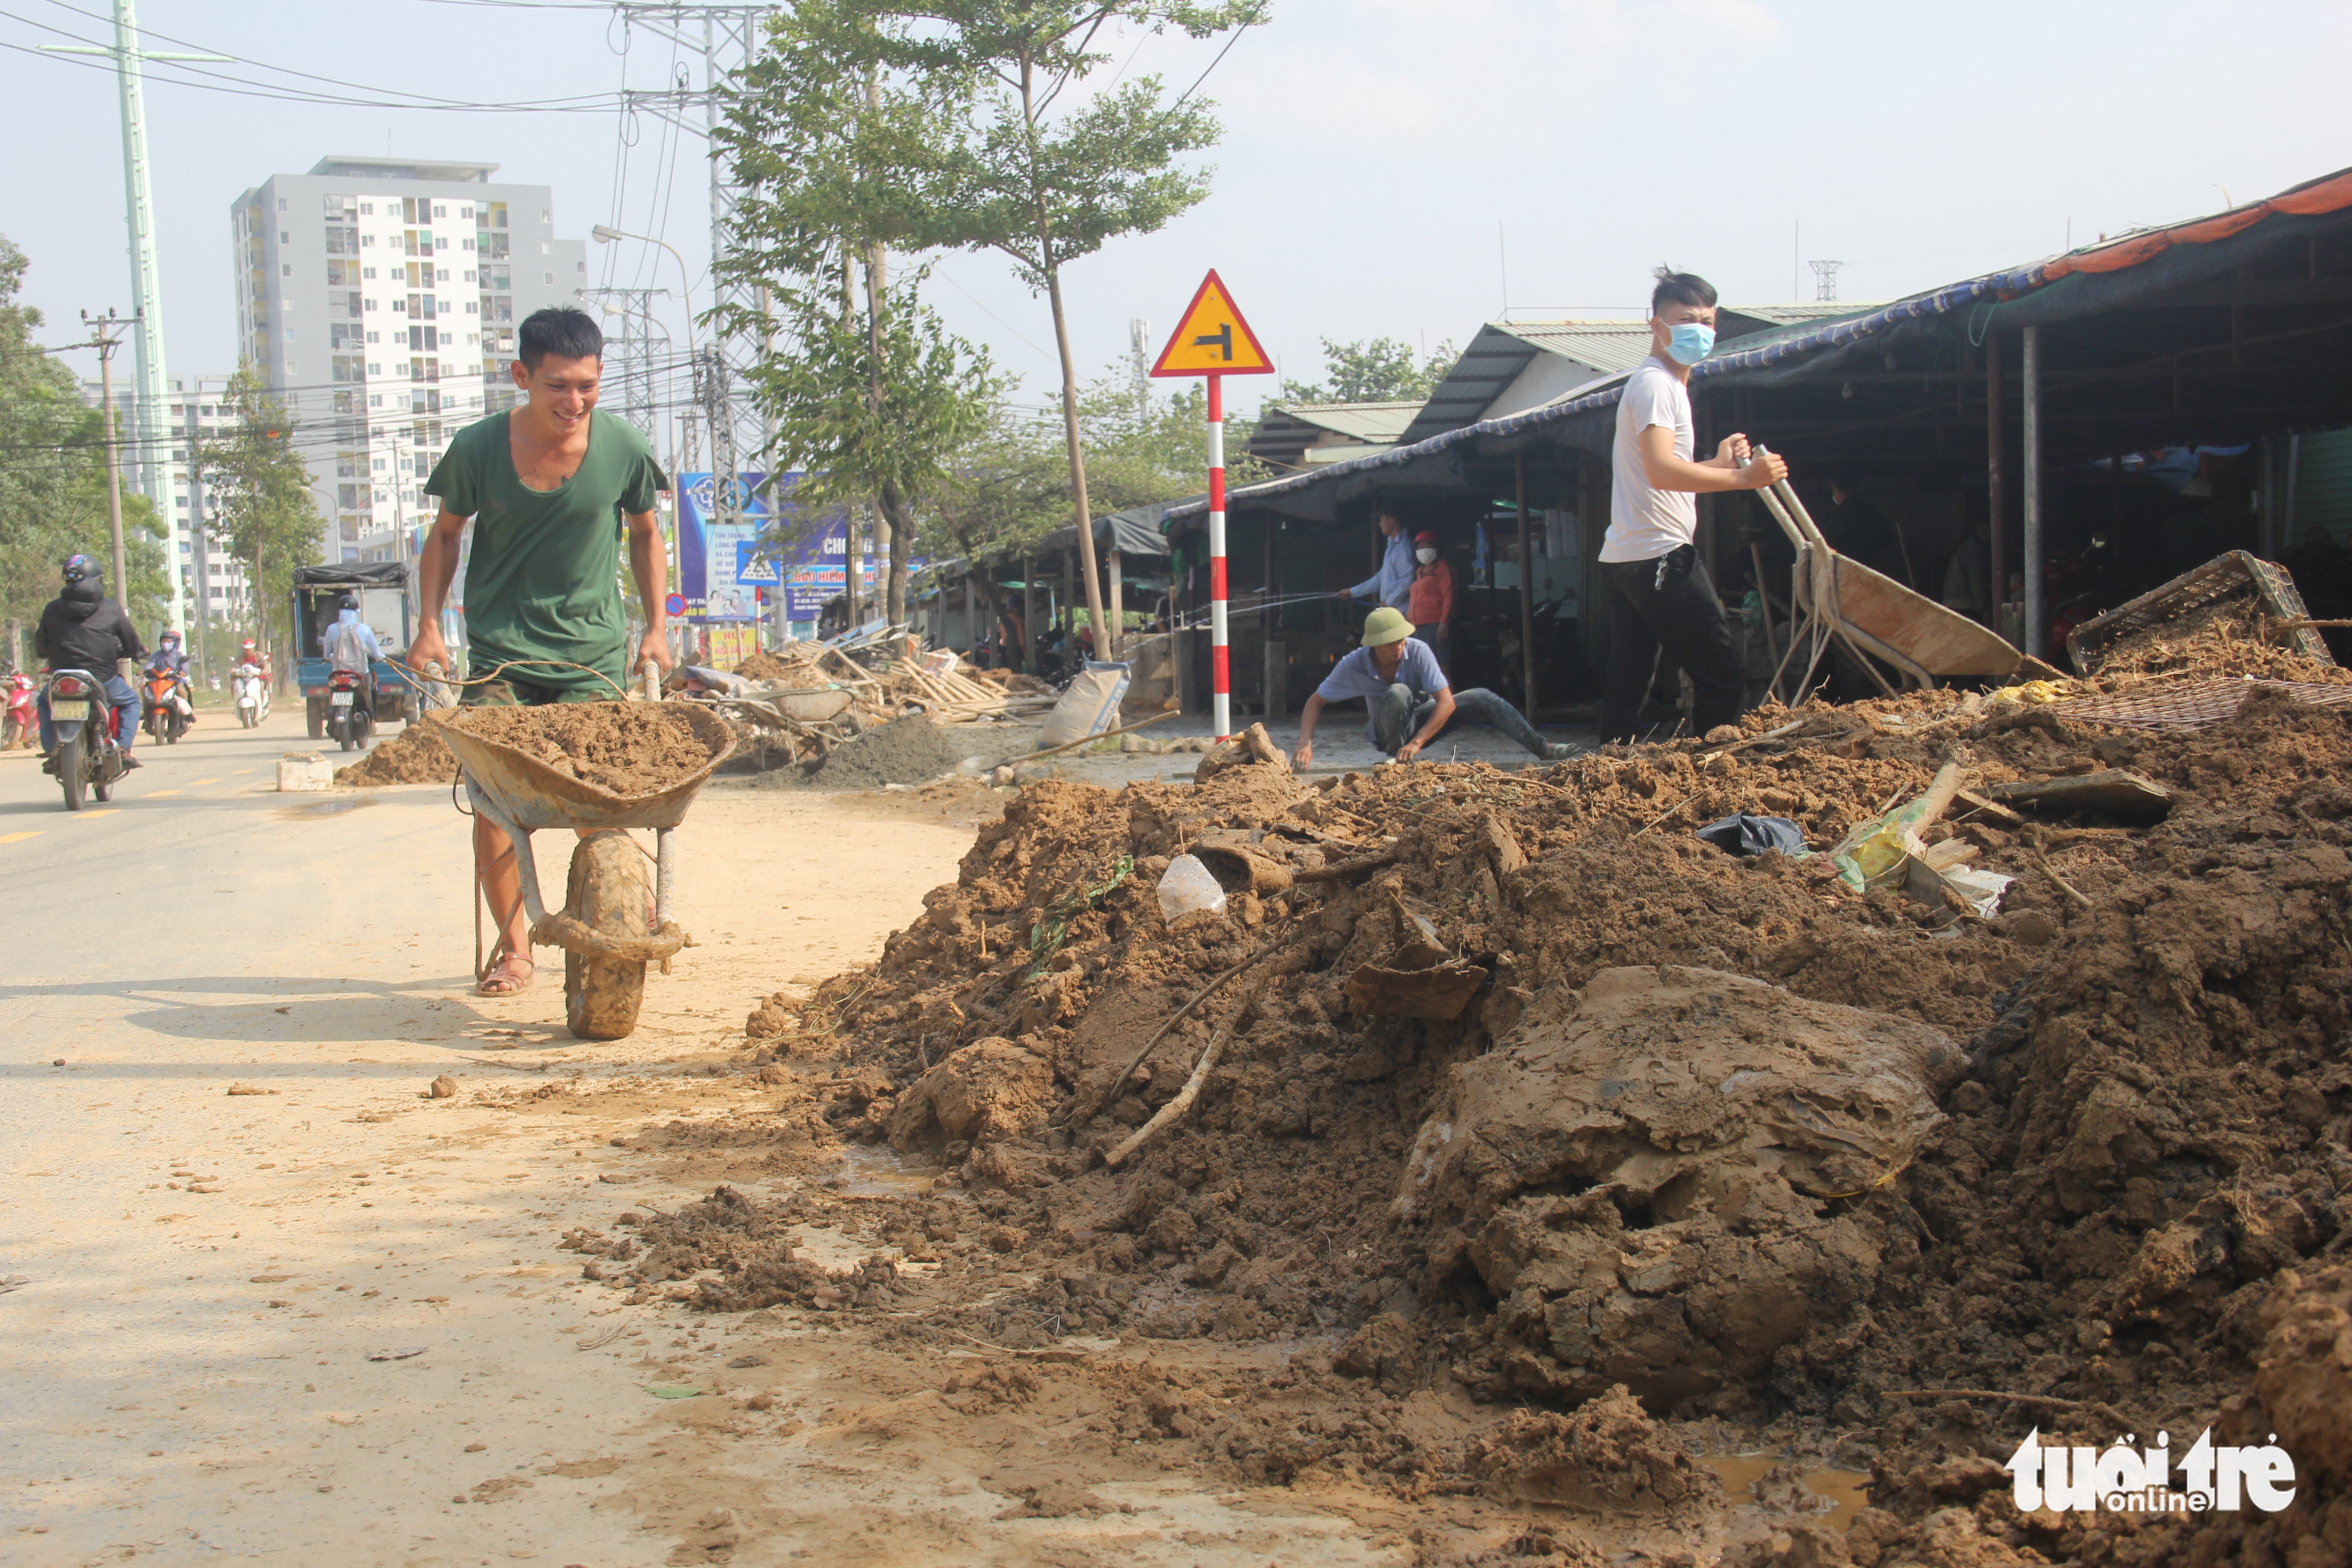 People clean up a street in Lien Chieu District, Da Nang City, Vietnam, October 18, 2022. Photo: Truong Trung / Tuoi Tre